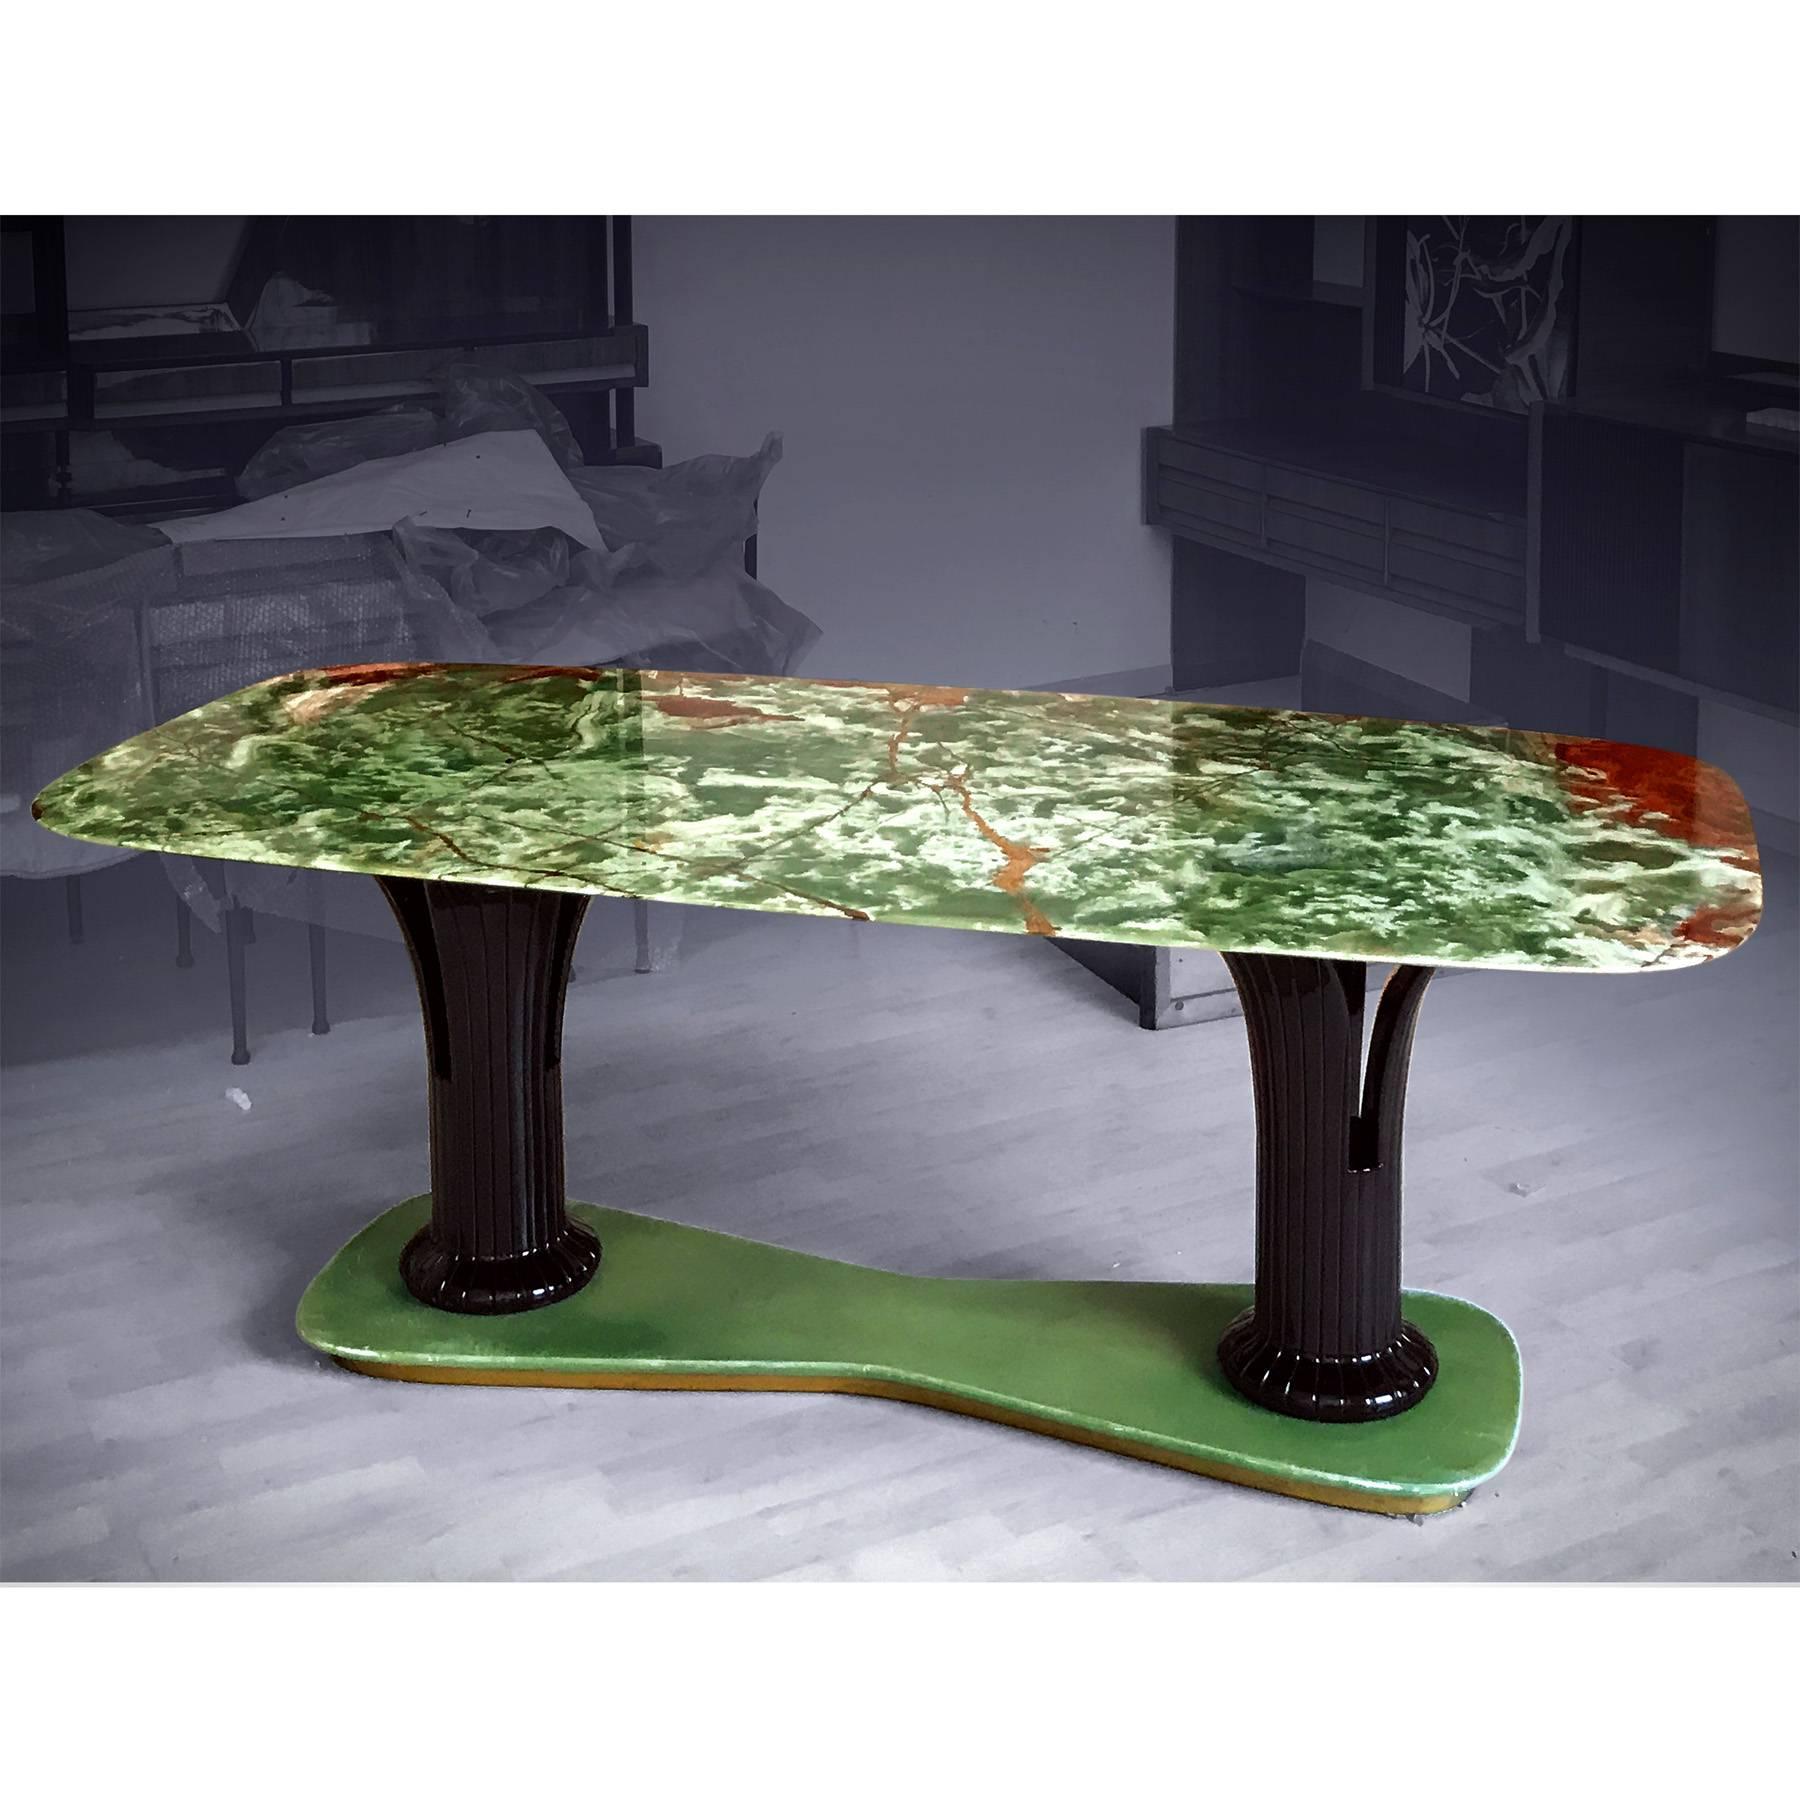 Stylish design for this dining table of the 1950s attributed to La Permanente Mobili Cantù.
The tabletop is made of Pakistan green onyx, very rare marble chosen by the most important Italian Designers and Manufacturers of the 1950s to increase the